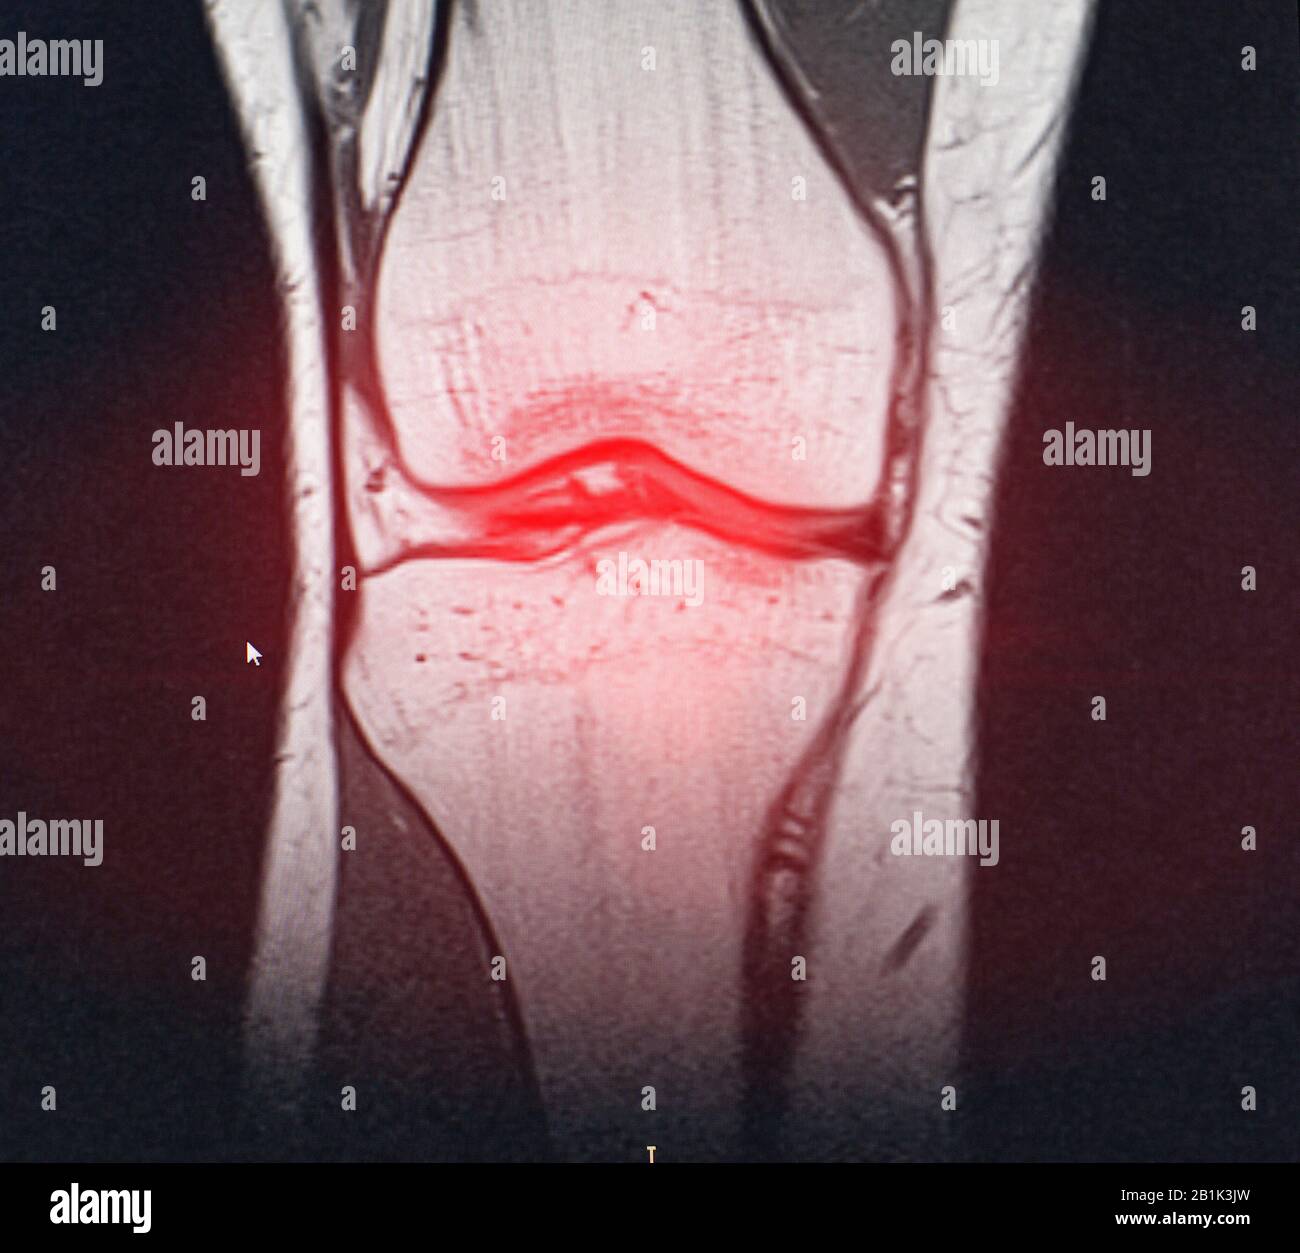 A snapshot of the diagnosis of an MRI of the knee in which arthrosis and arthritis. The concept of joint diagnosis using x-rays, treatment of diseases Stock Photo